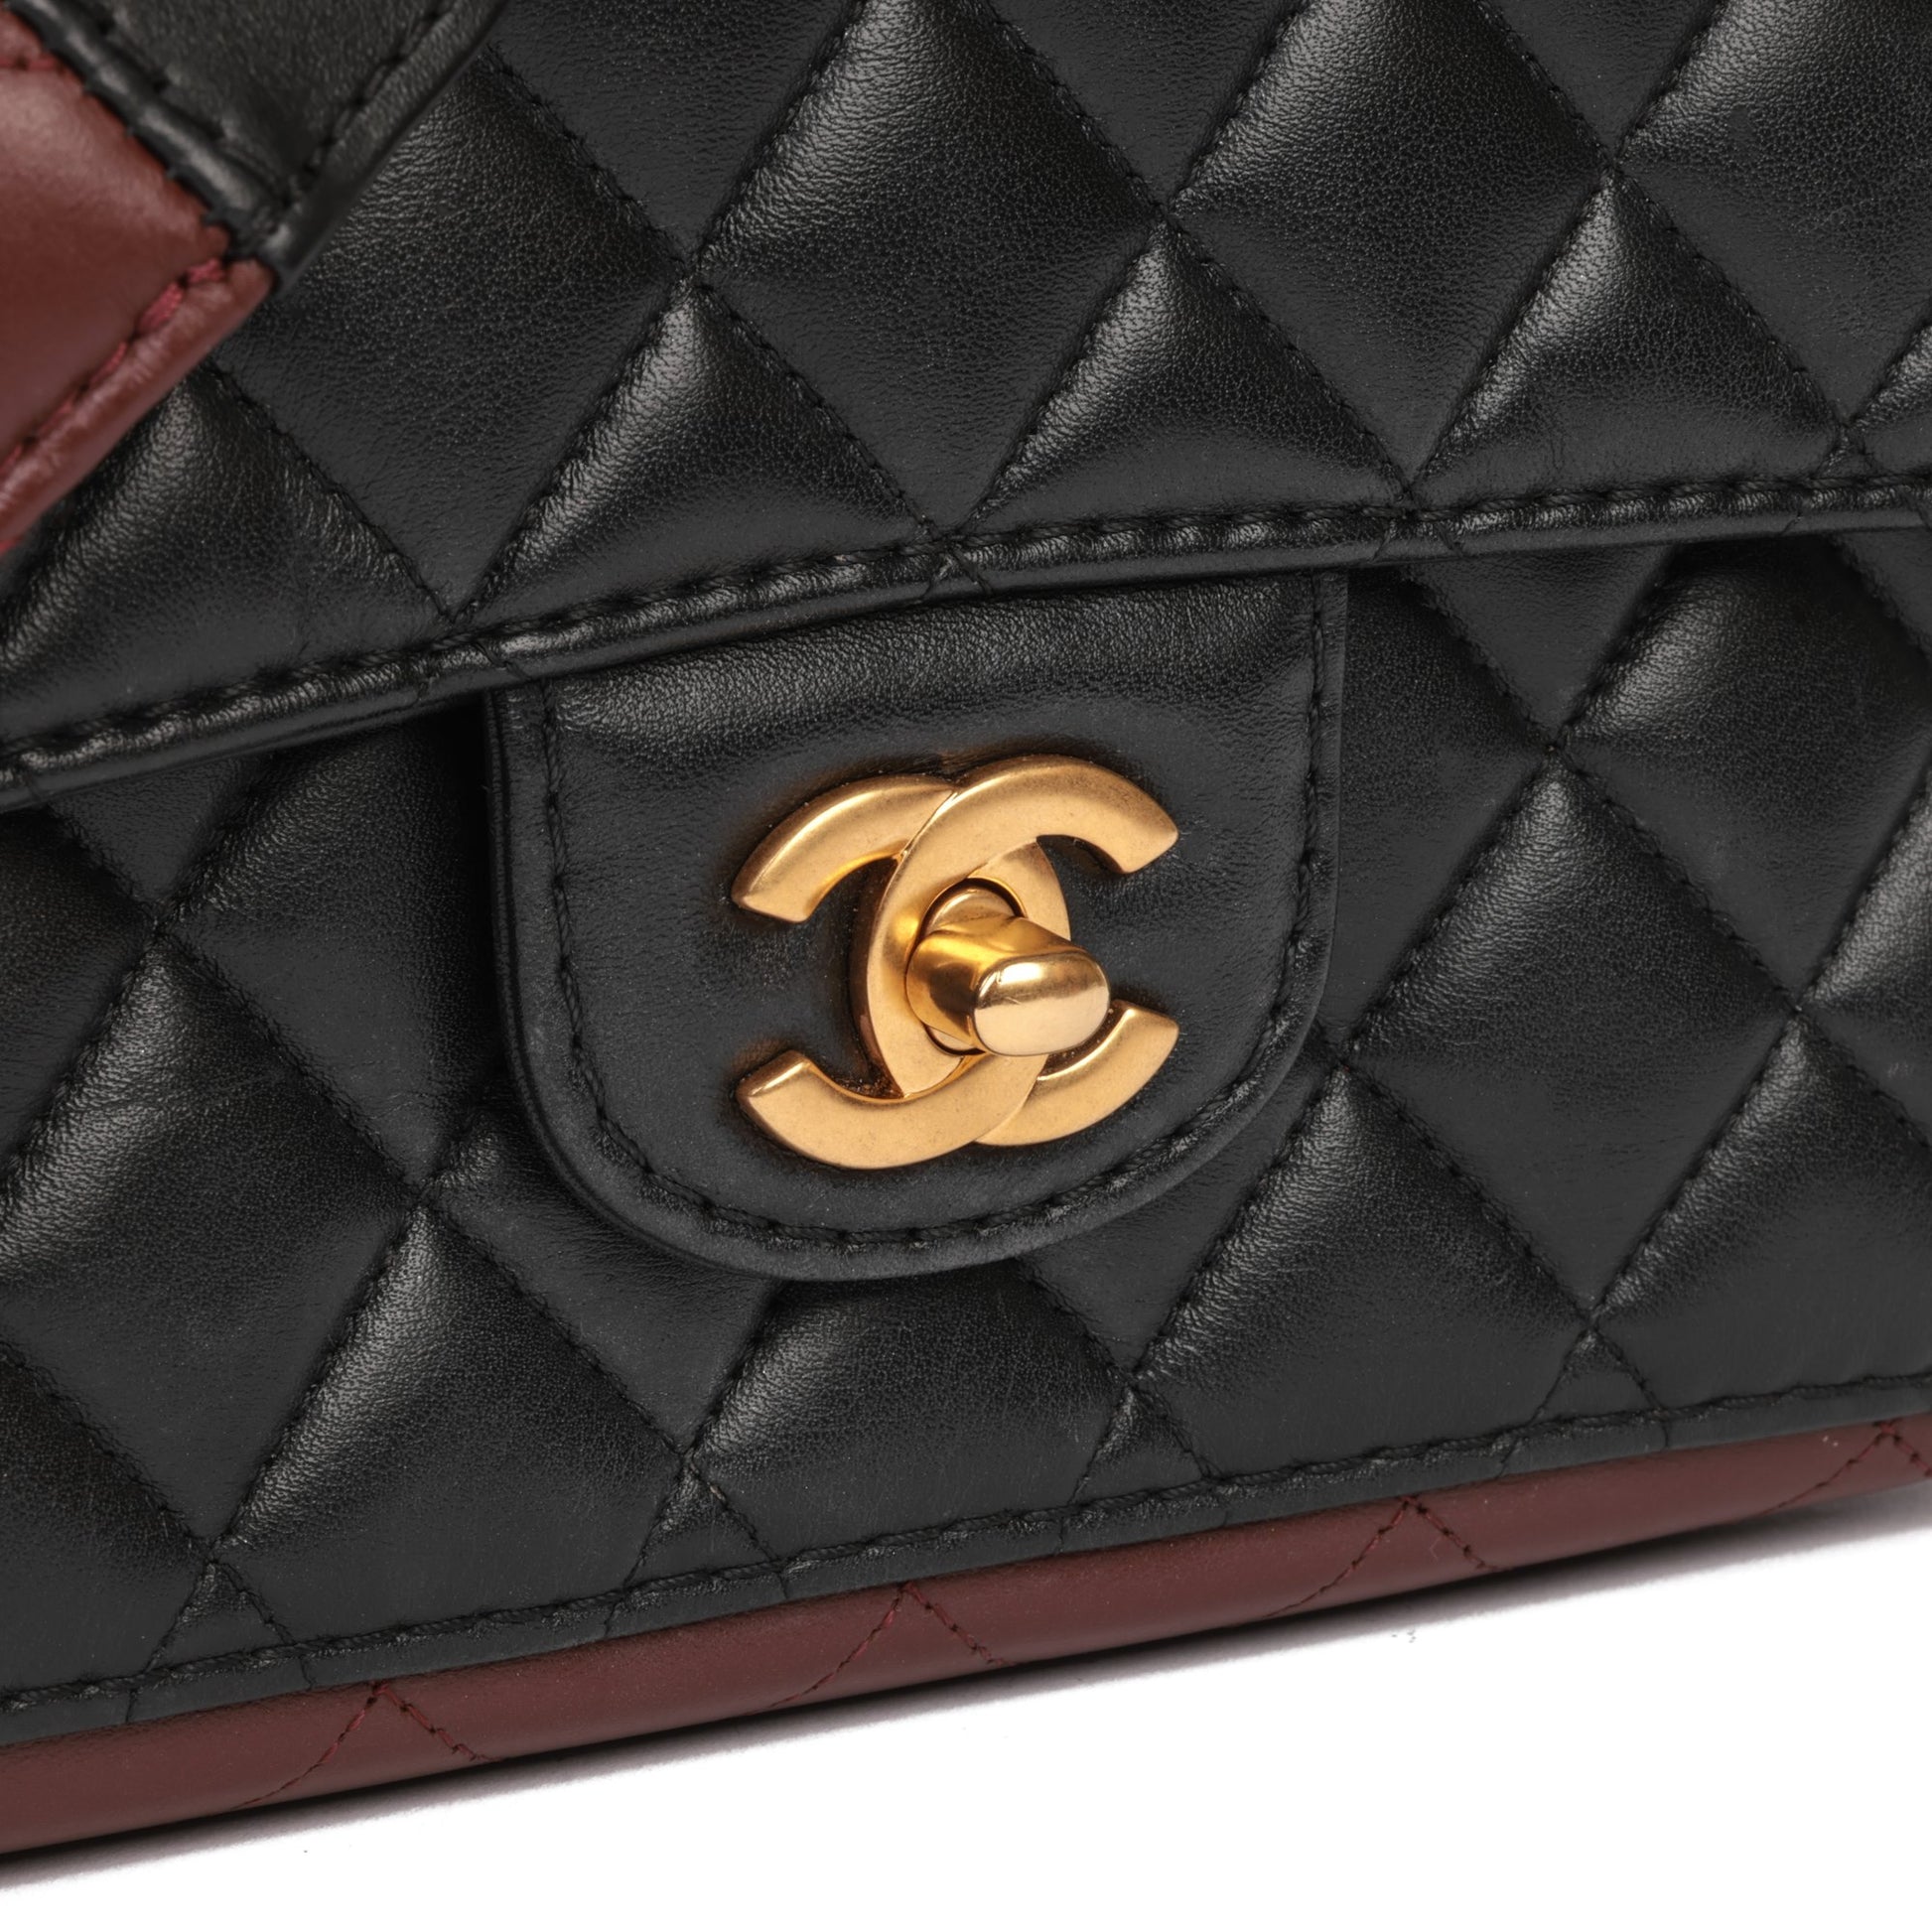 Splendid Chanel Mini Timeless square flap bag in black quilted